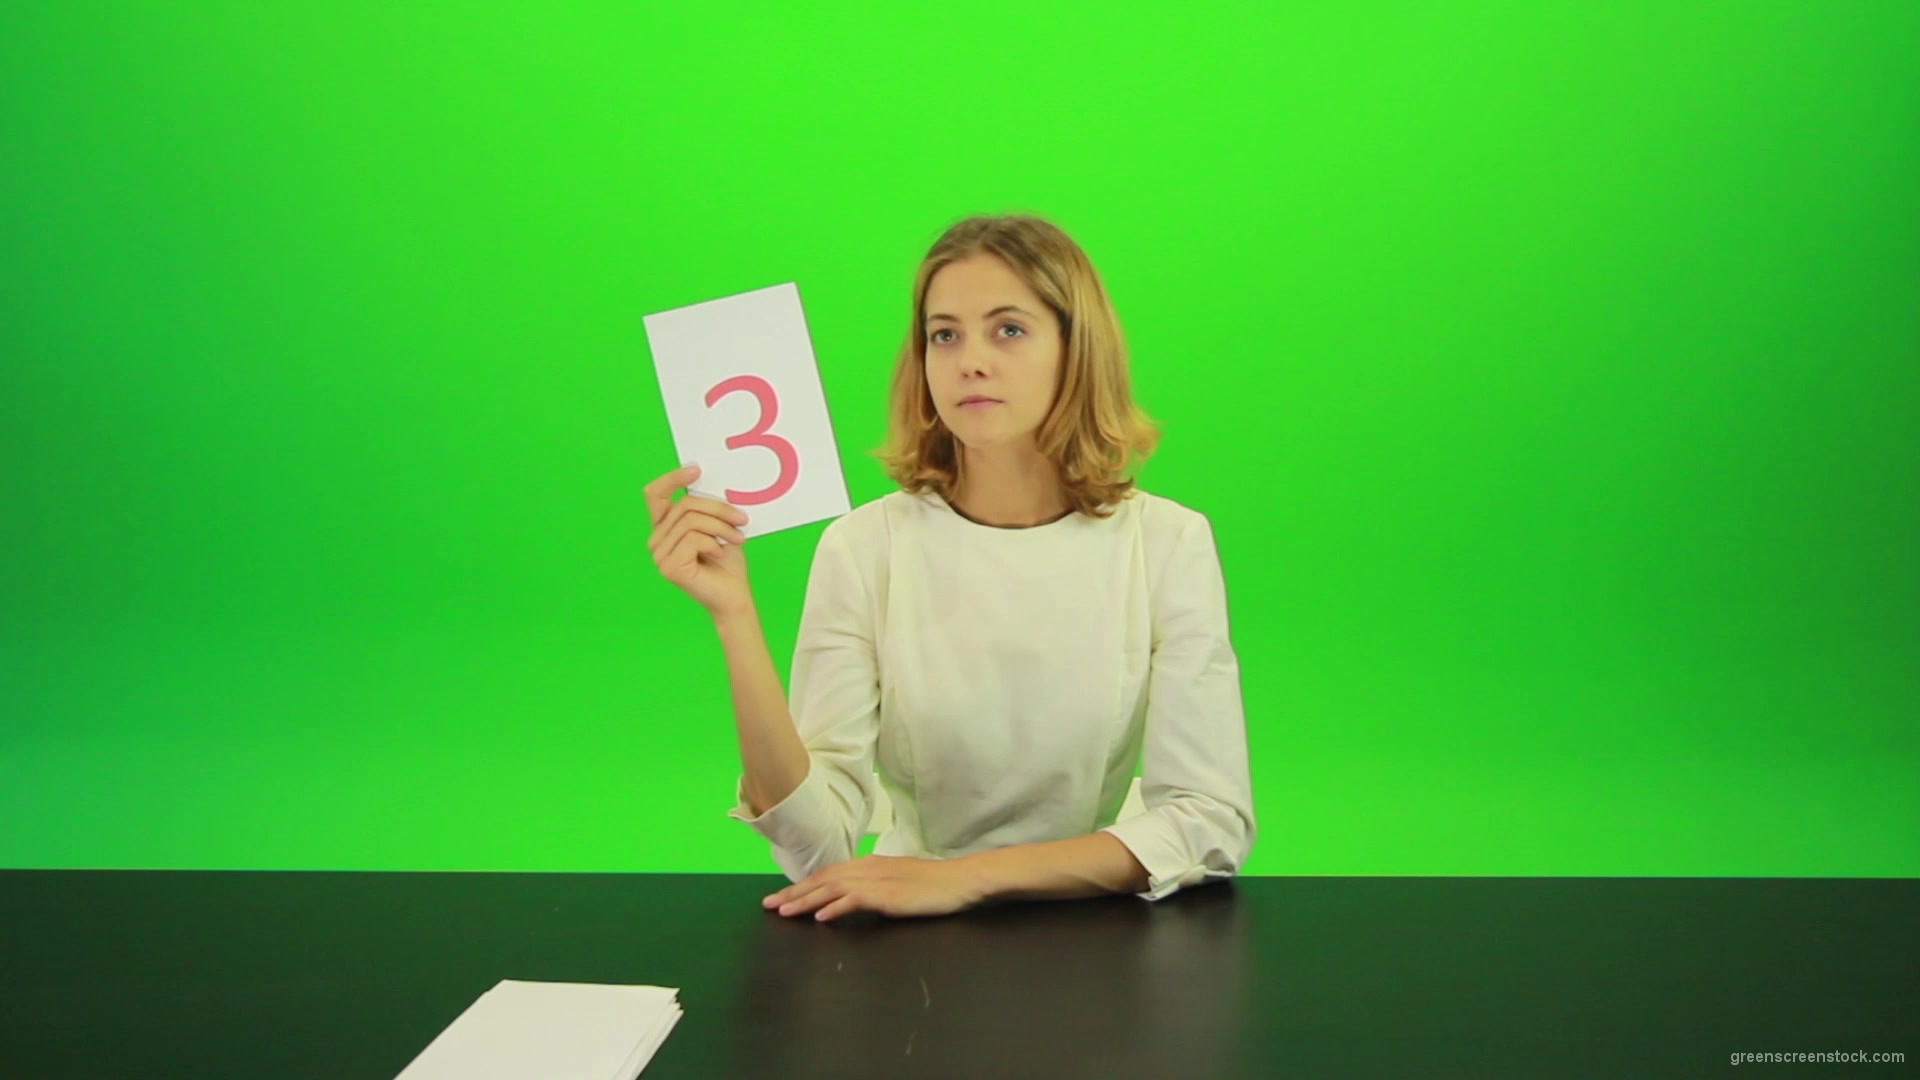 Blonde-hair-girl-in-white-shirt-give-3-point-mark-score-Full-HD-Green-Screen-Video-Footage_005 Green Screen Stock